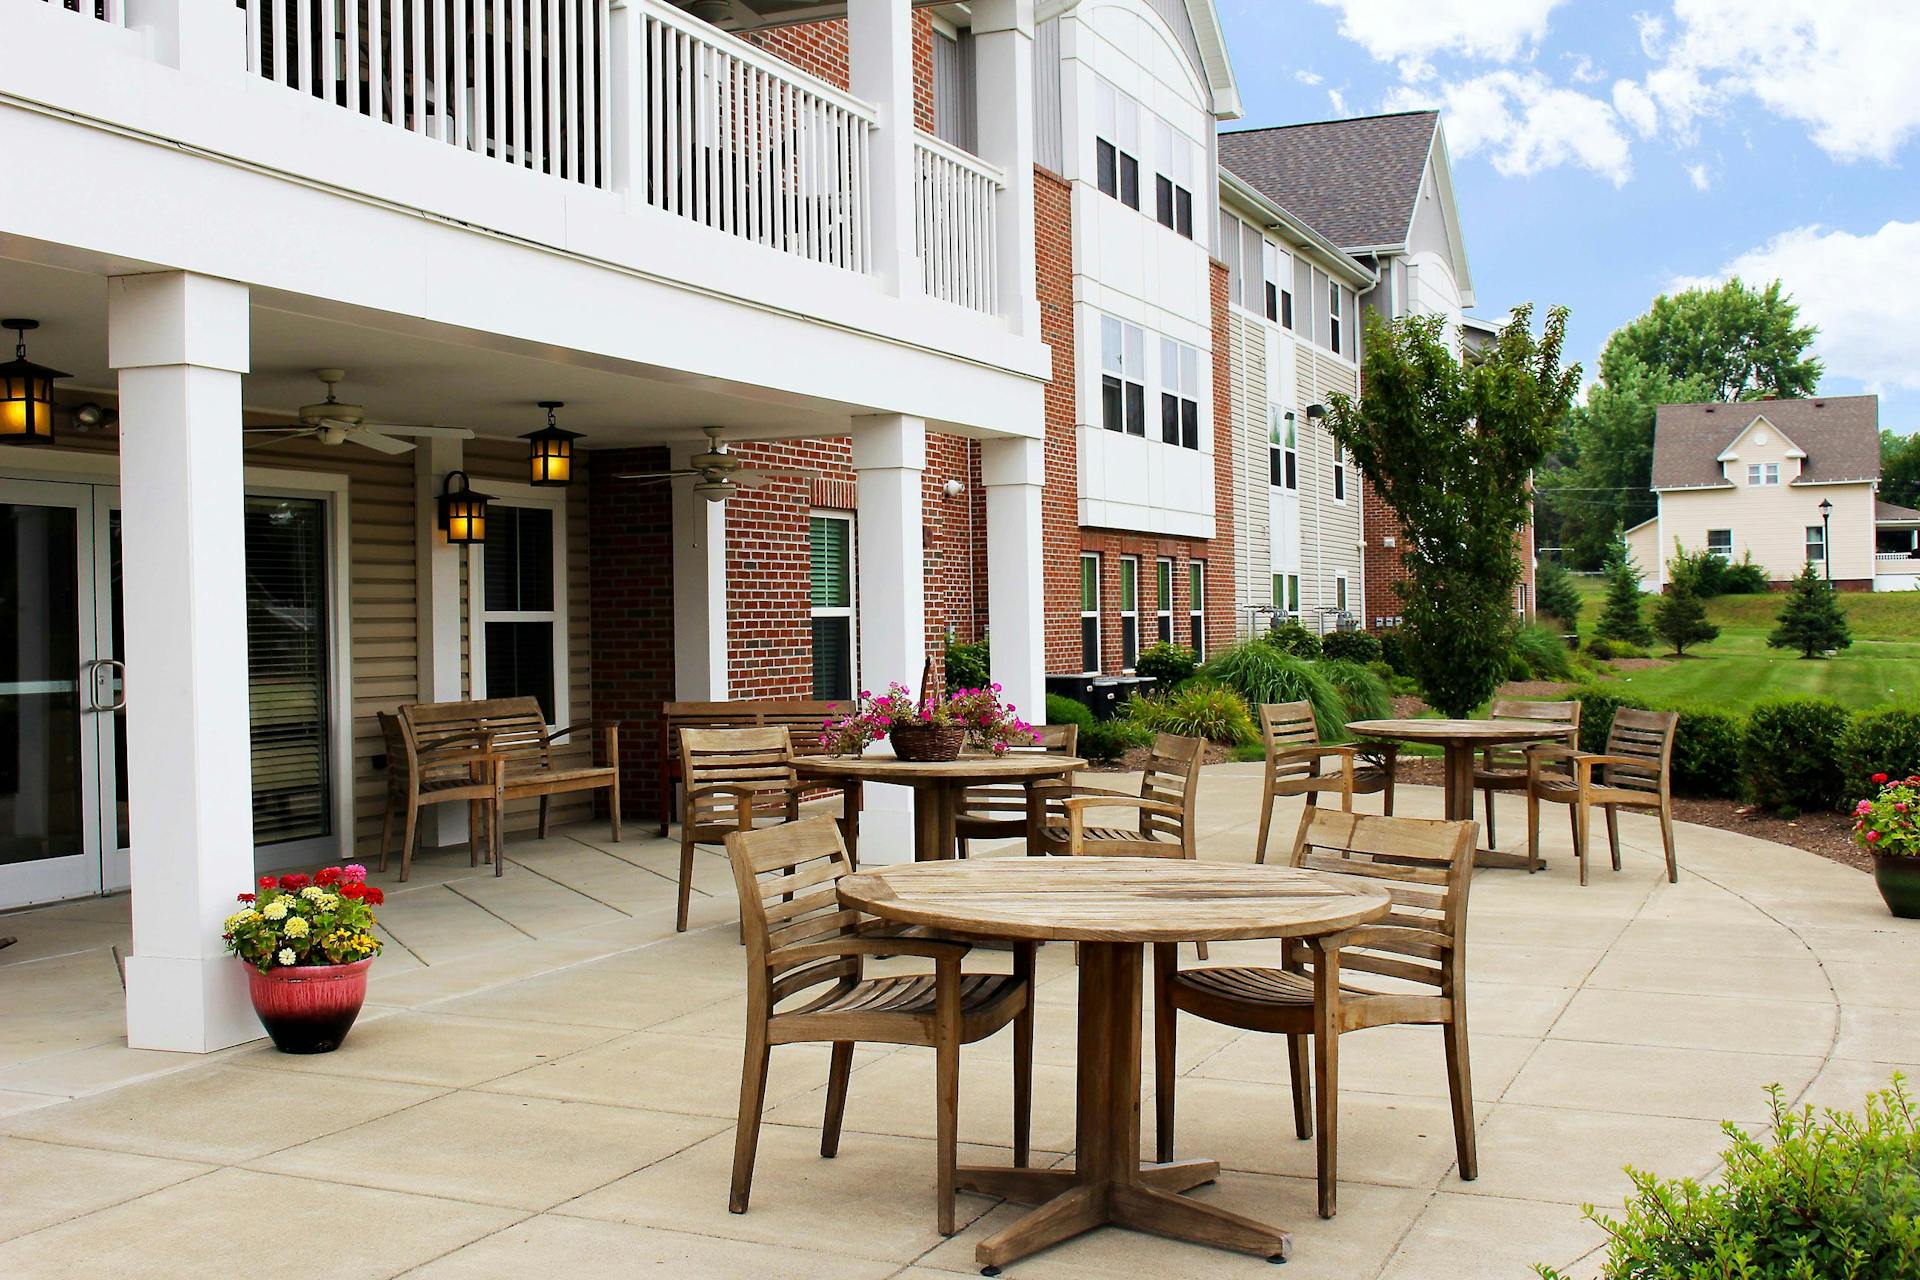 Outdoor table and chairs on stone patio